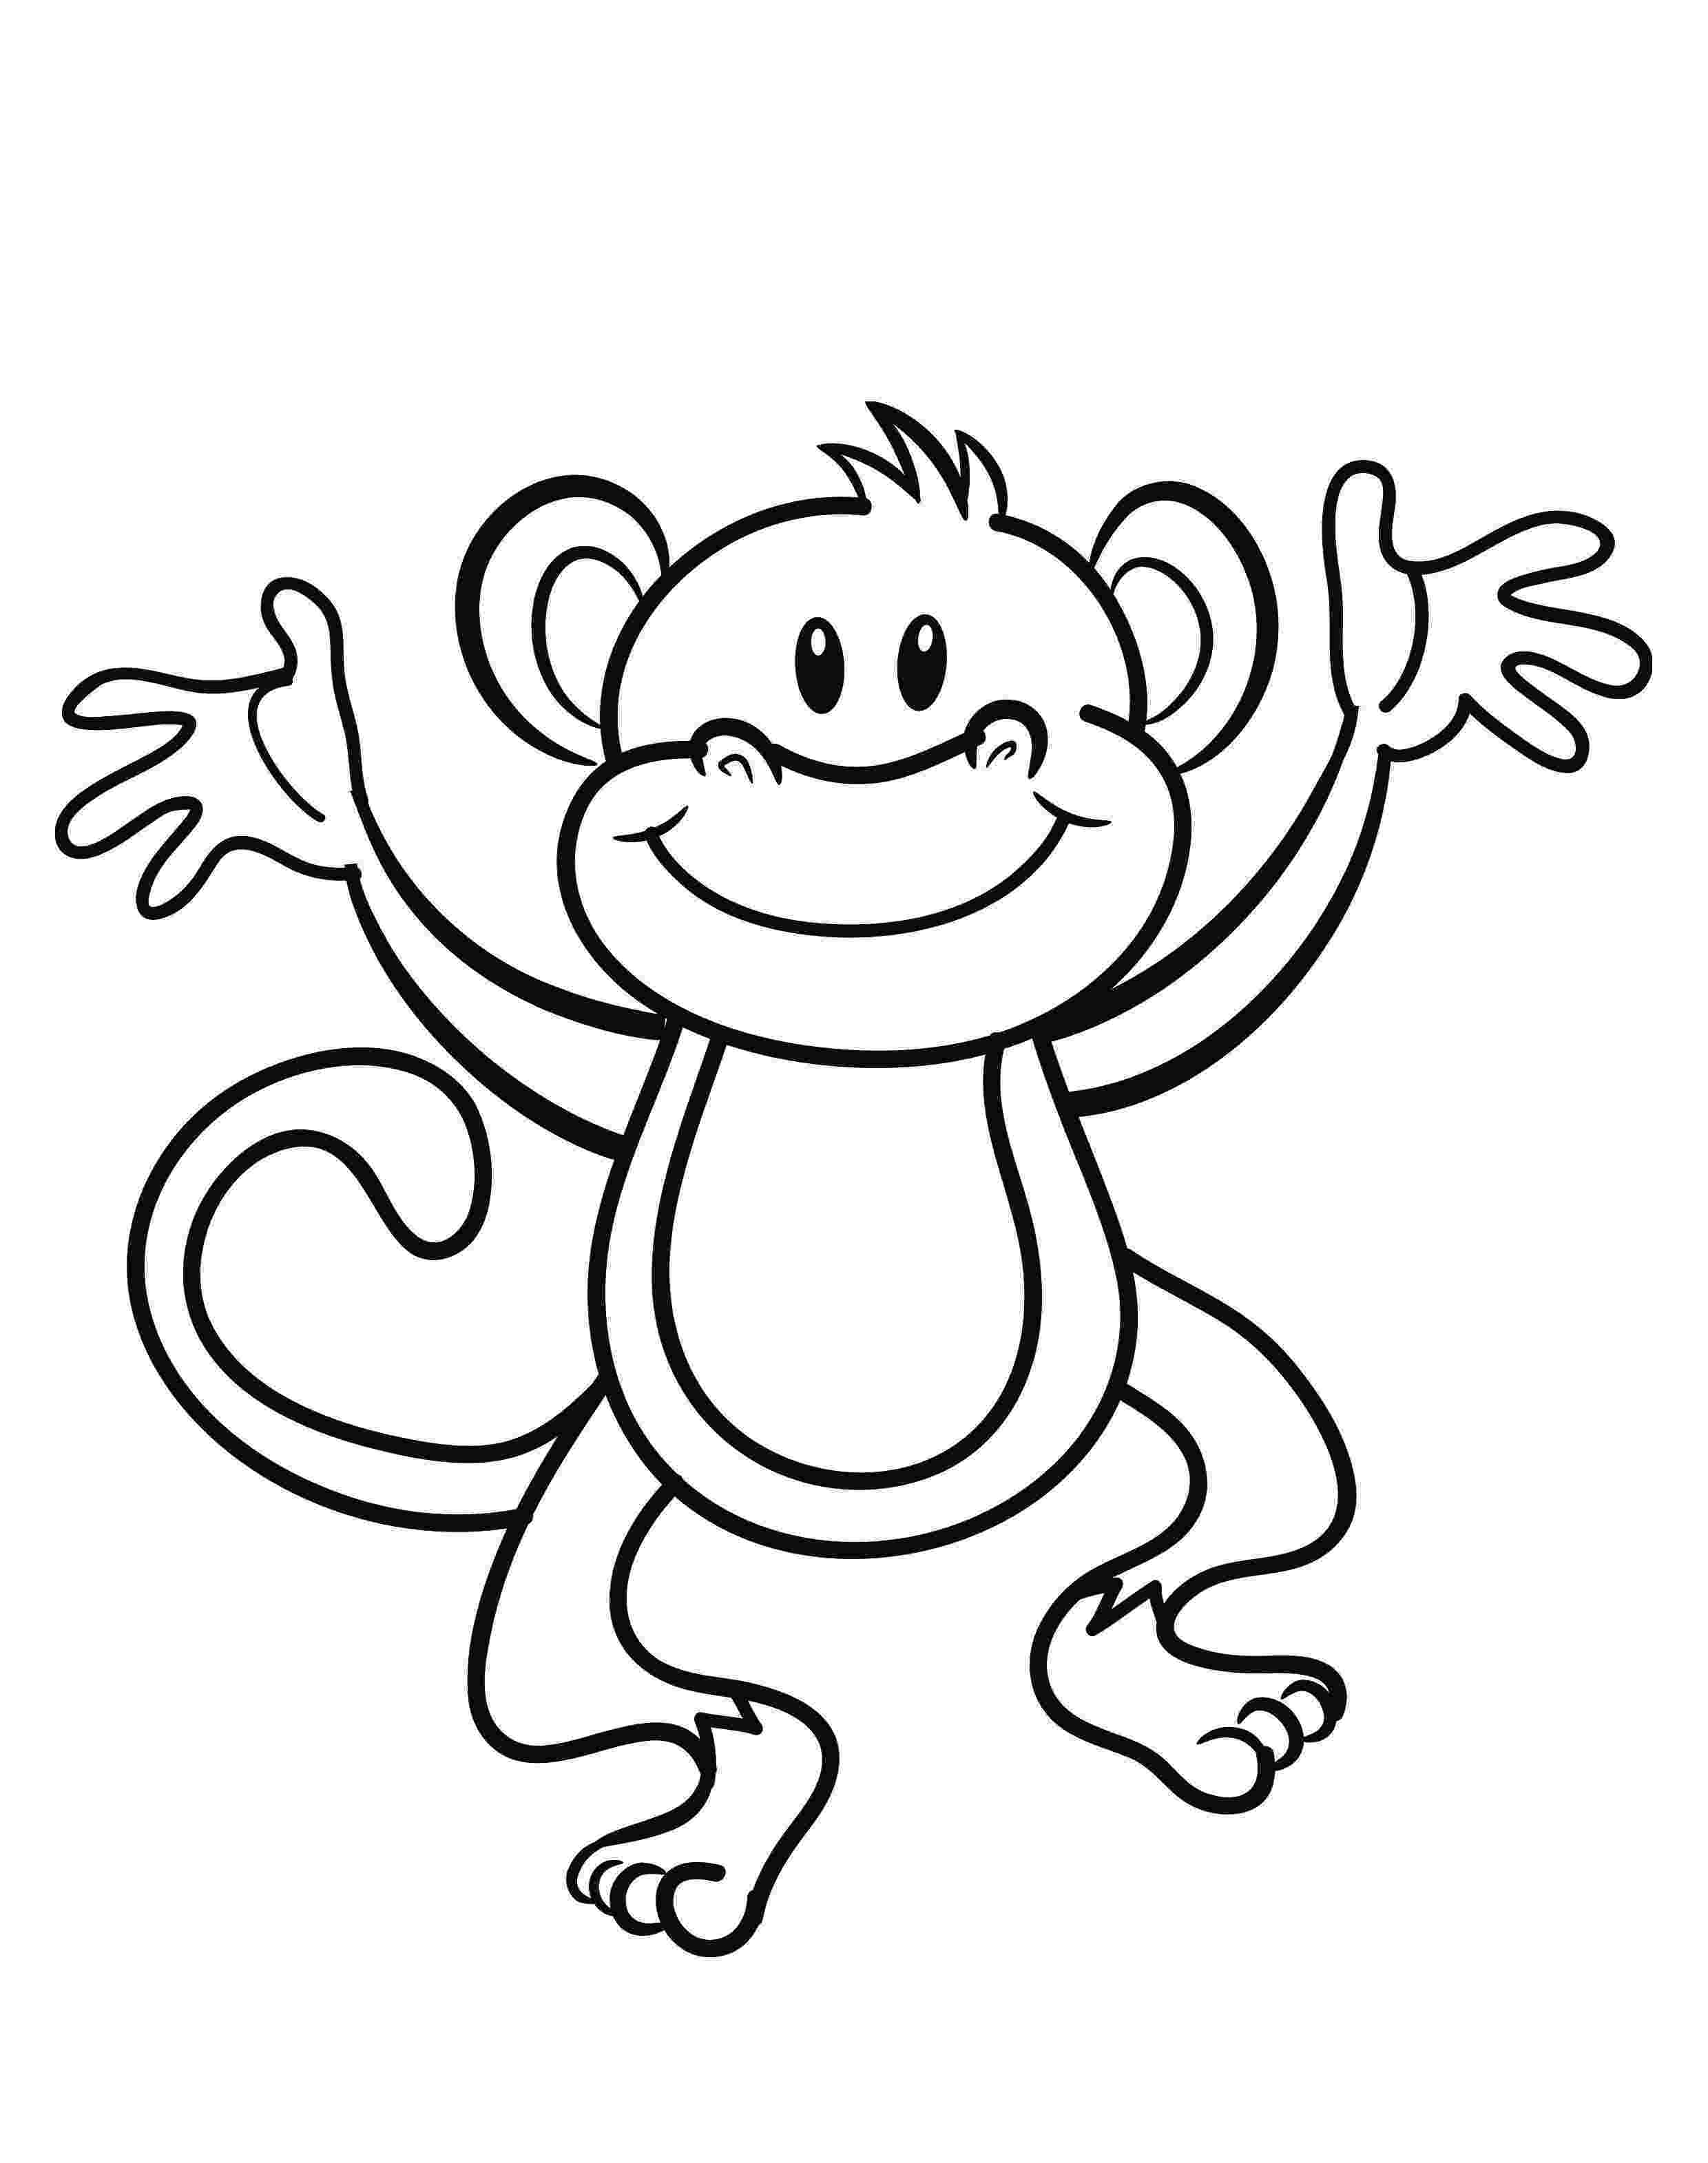 monkeys coloring pages monkey cars judo colouring pages qaf quotقquot kerd monkeyقرد monkeys pages coloring 